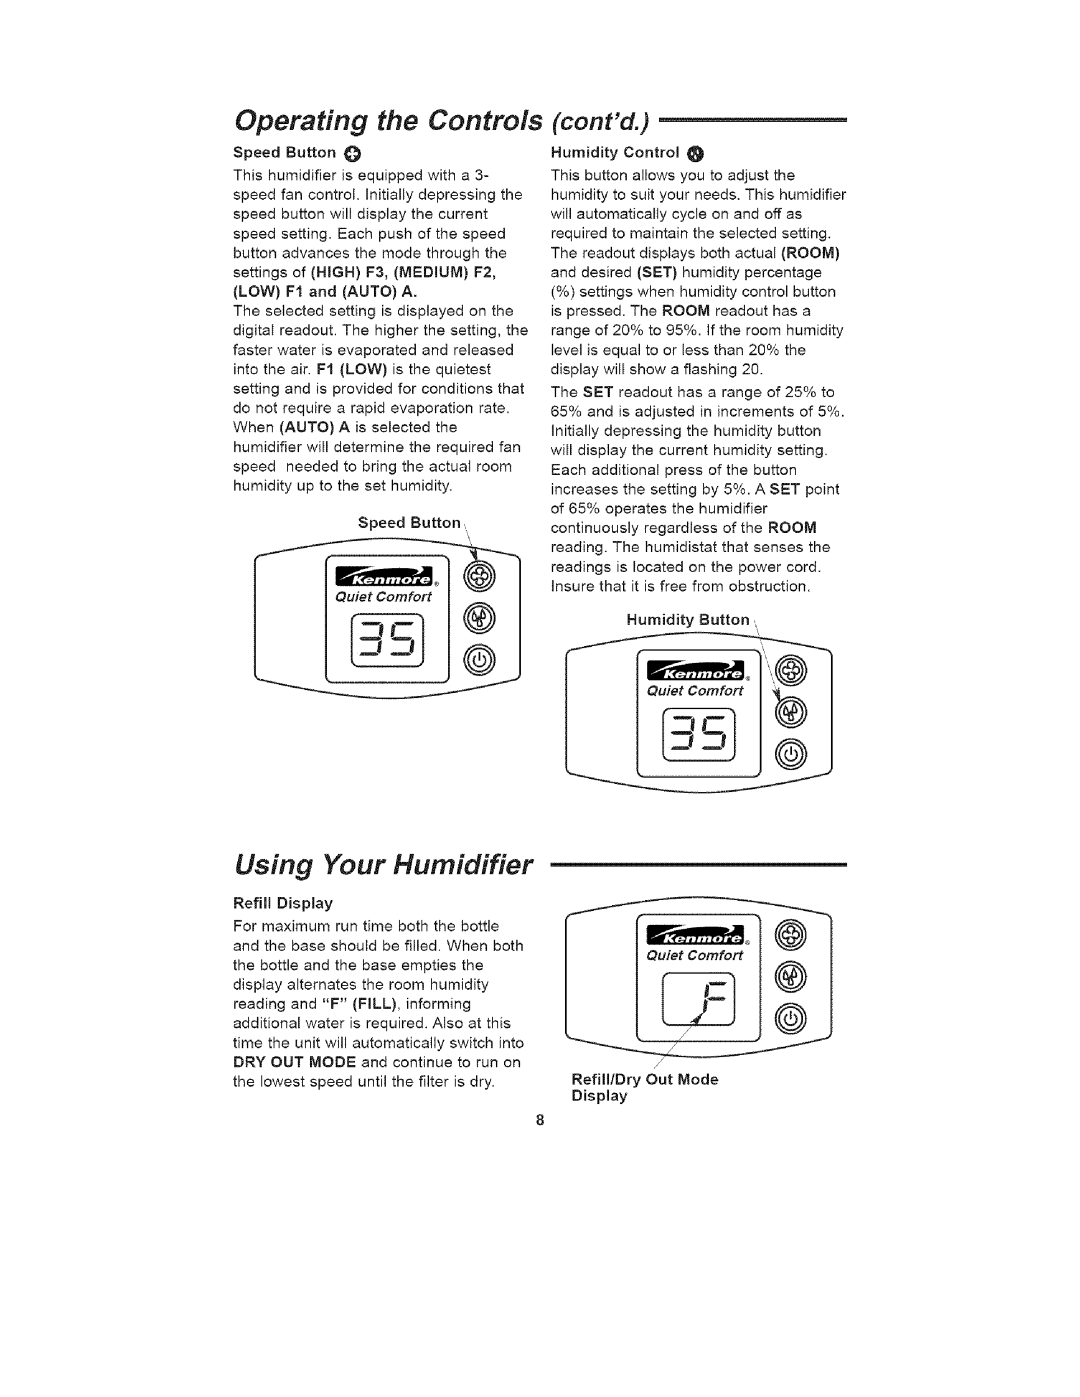 Kenmore 758.15408 manual Operating the Controls, Using Your Humidifier, contd 